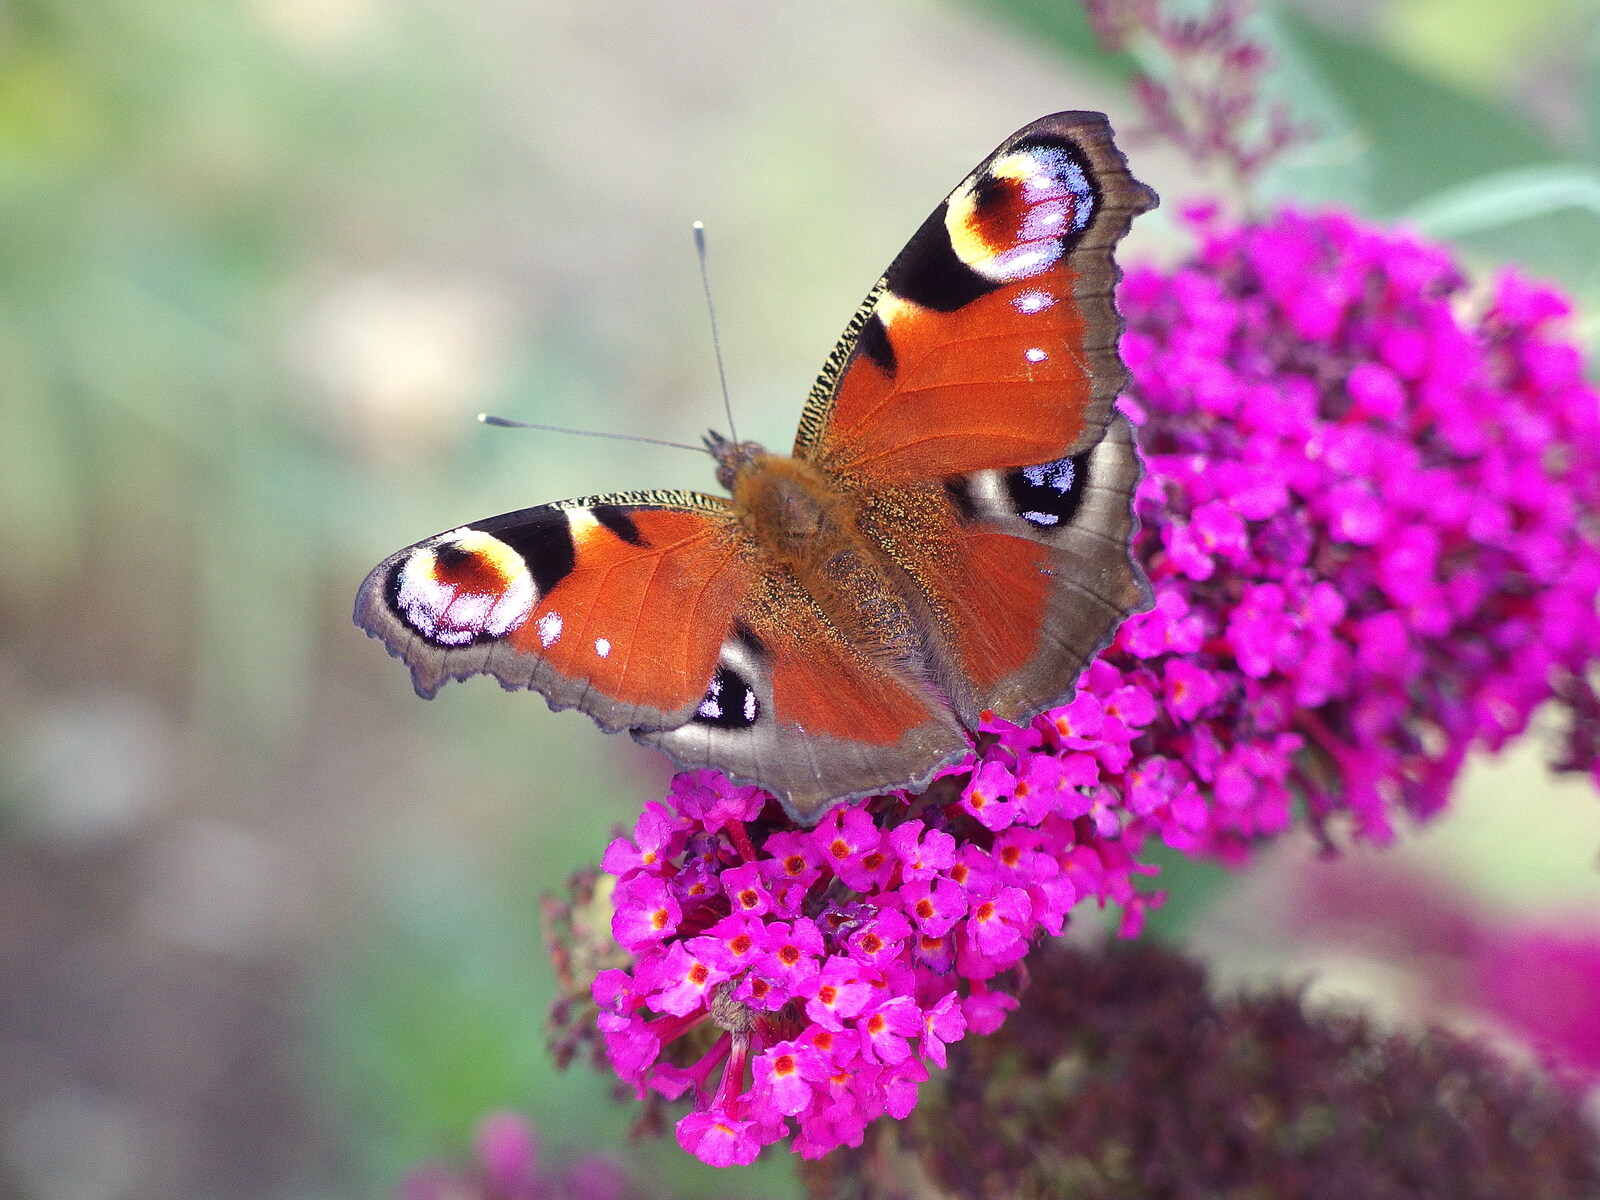 The Denton Beer Festival and a Party, Brockdish, Norfolk - 16th July 2022: Butterflies love buddleia